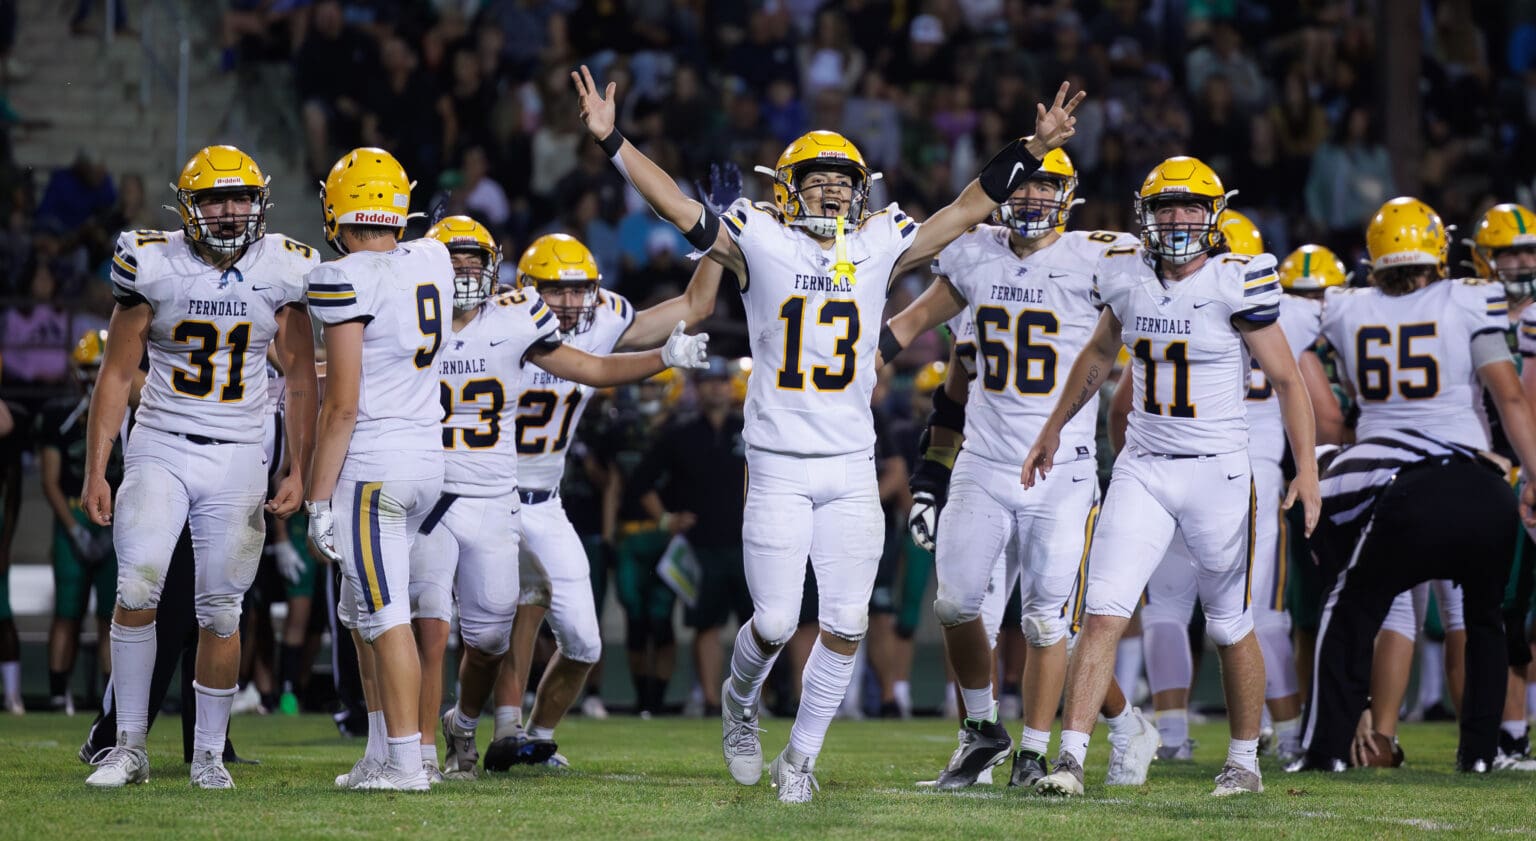 Ferndale’s Bishop Ootsey (13) celebrates with his teammates Friday